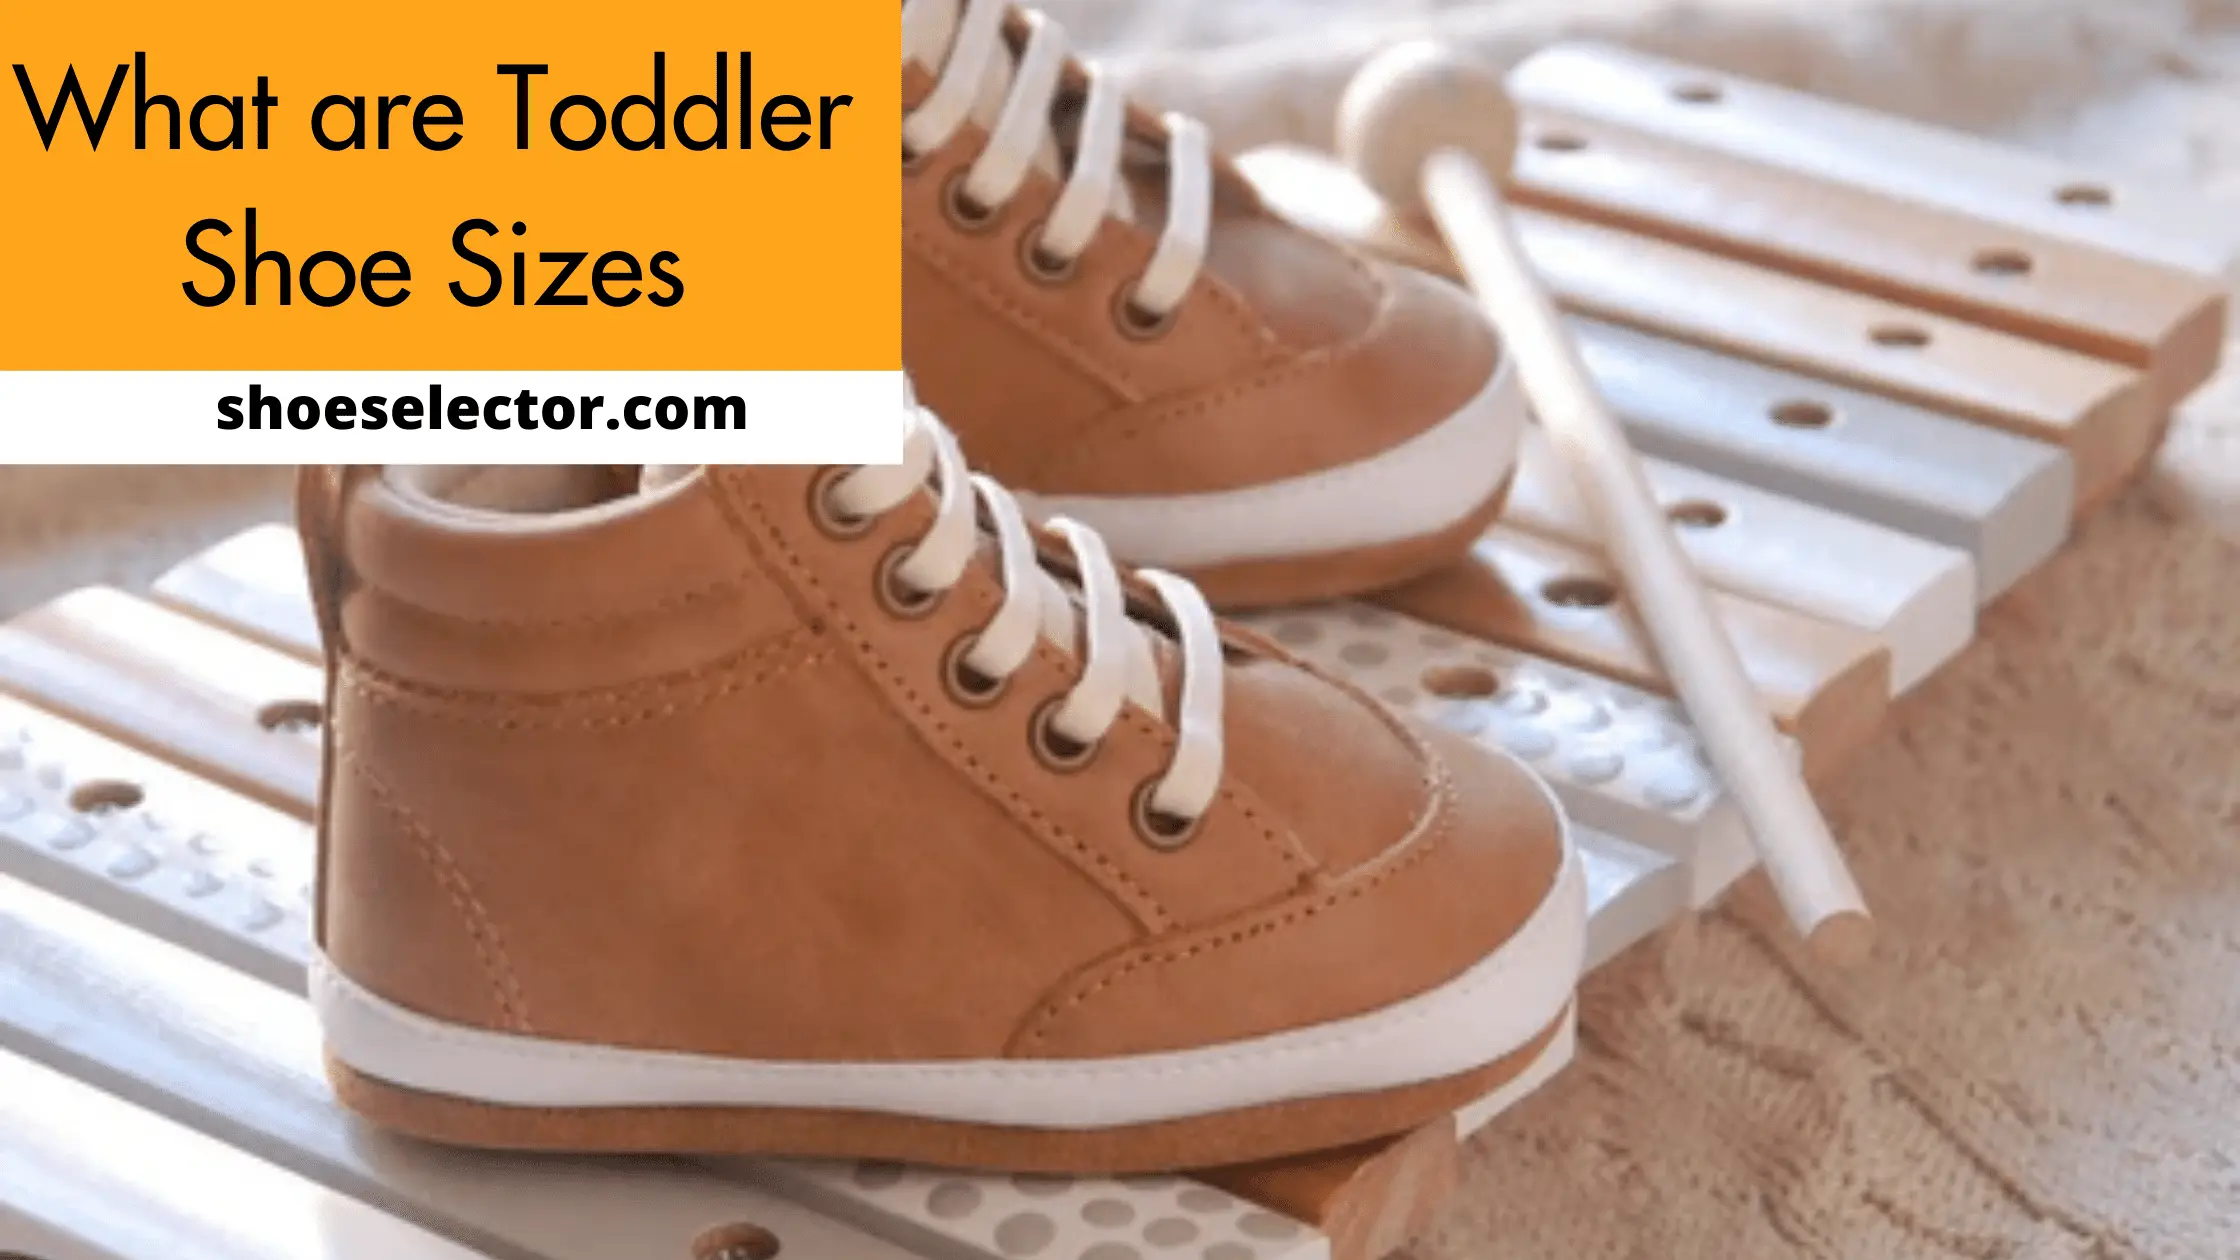 What are Toddler Shoe Sizes?